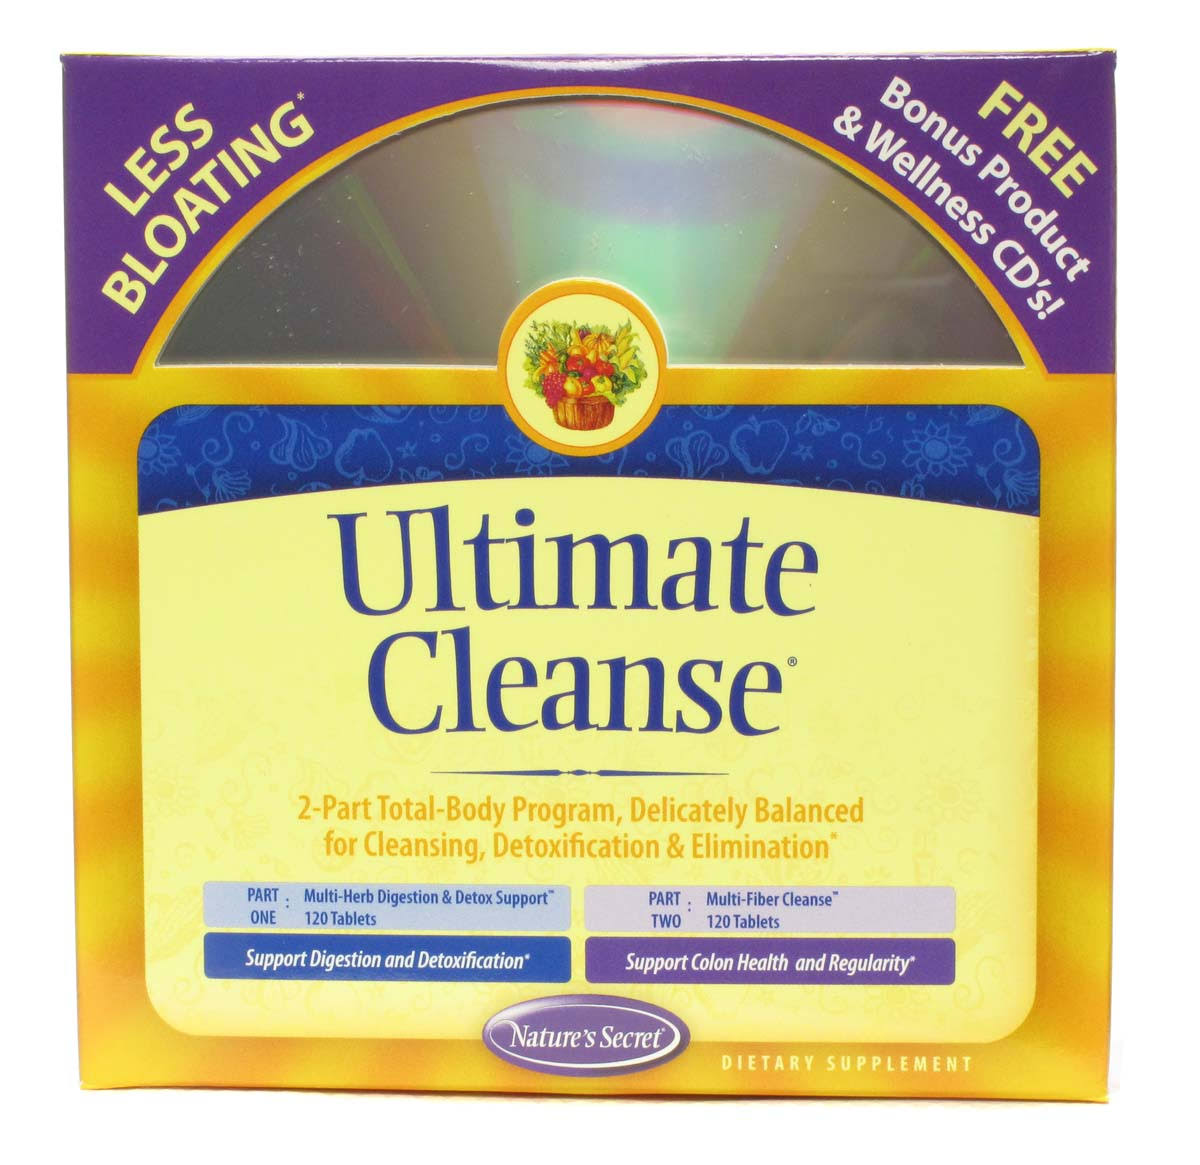 Nature's Secret Ultimate Cleanse 2-Part Program to Support Detoxification & Cleansing Tablets